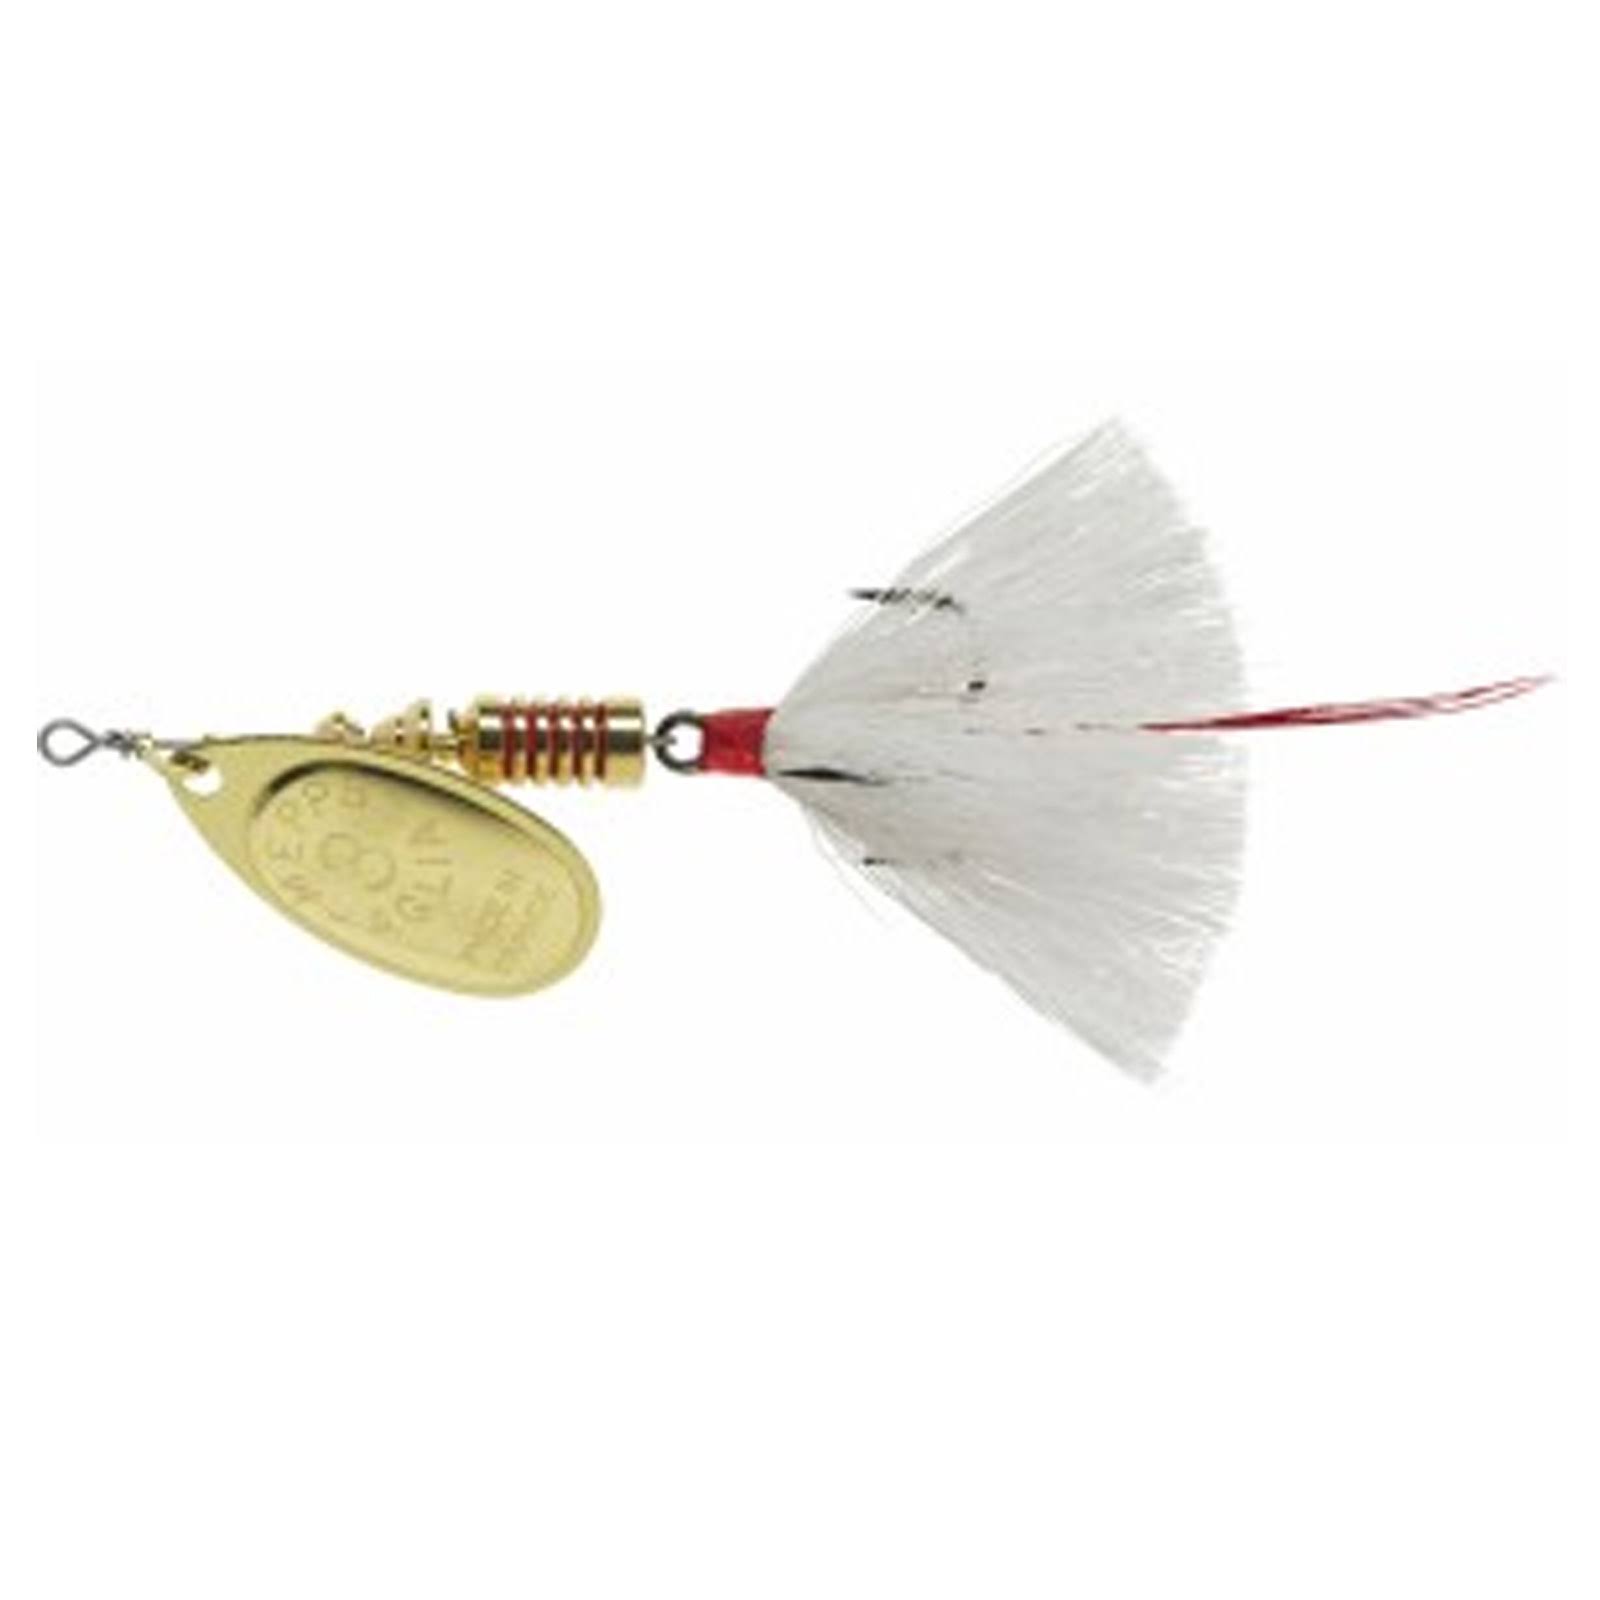 Mepps Aglia Size 3 Dressed Spinner Bait 30ml Gold White, B3ST G-W | Outdoors | 30 Day Money Back Guarantee | Best Price Guarantee